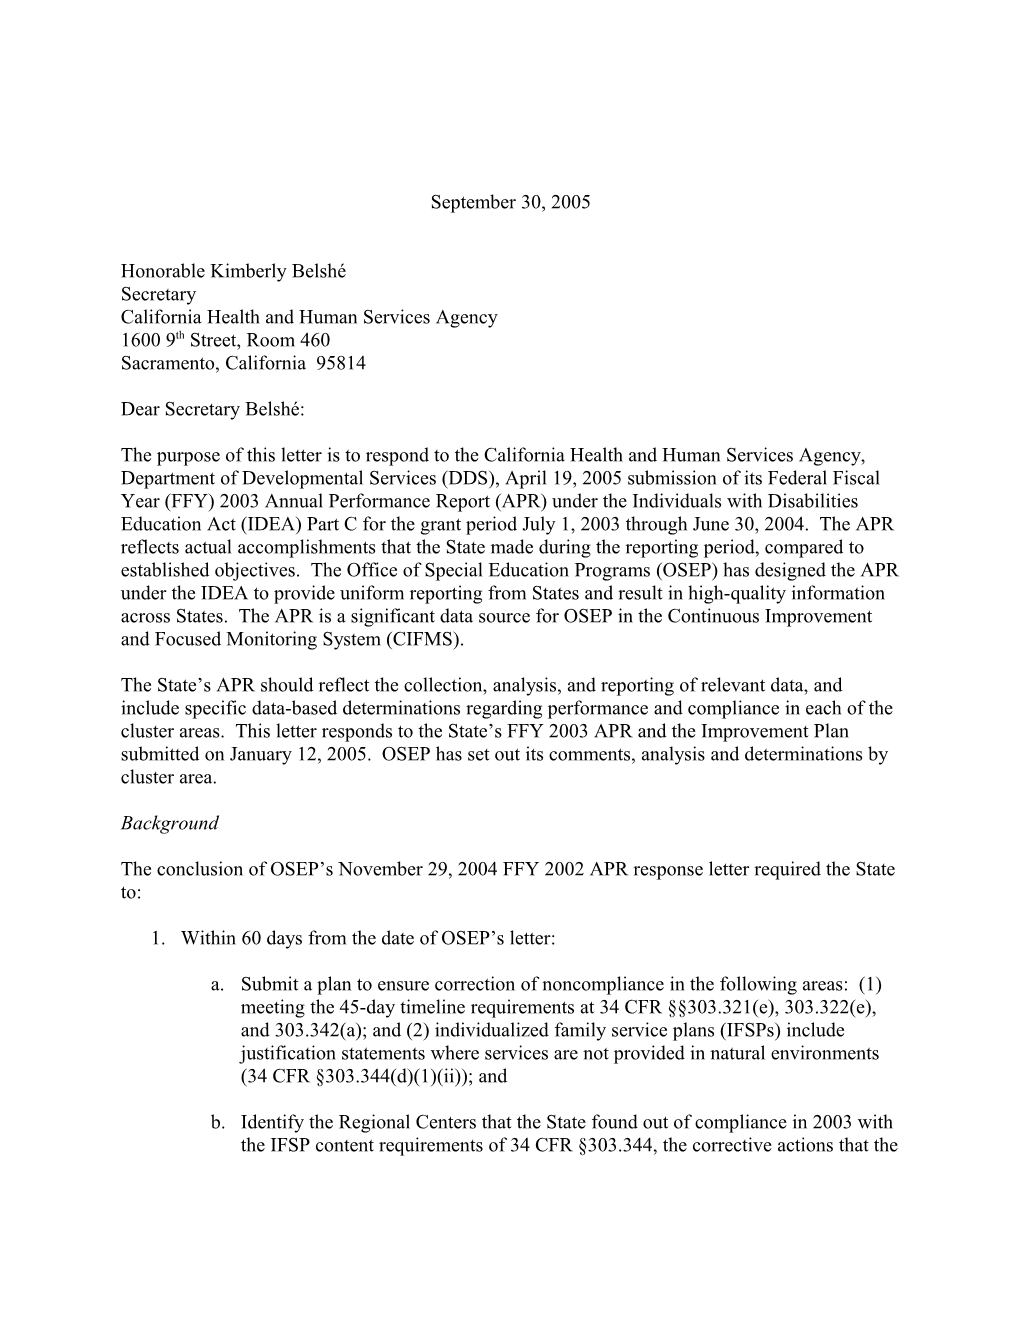 California Part C APR Letter for Grant Year 2003-2004 (Msword)